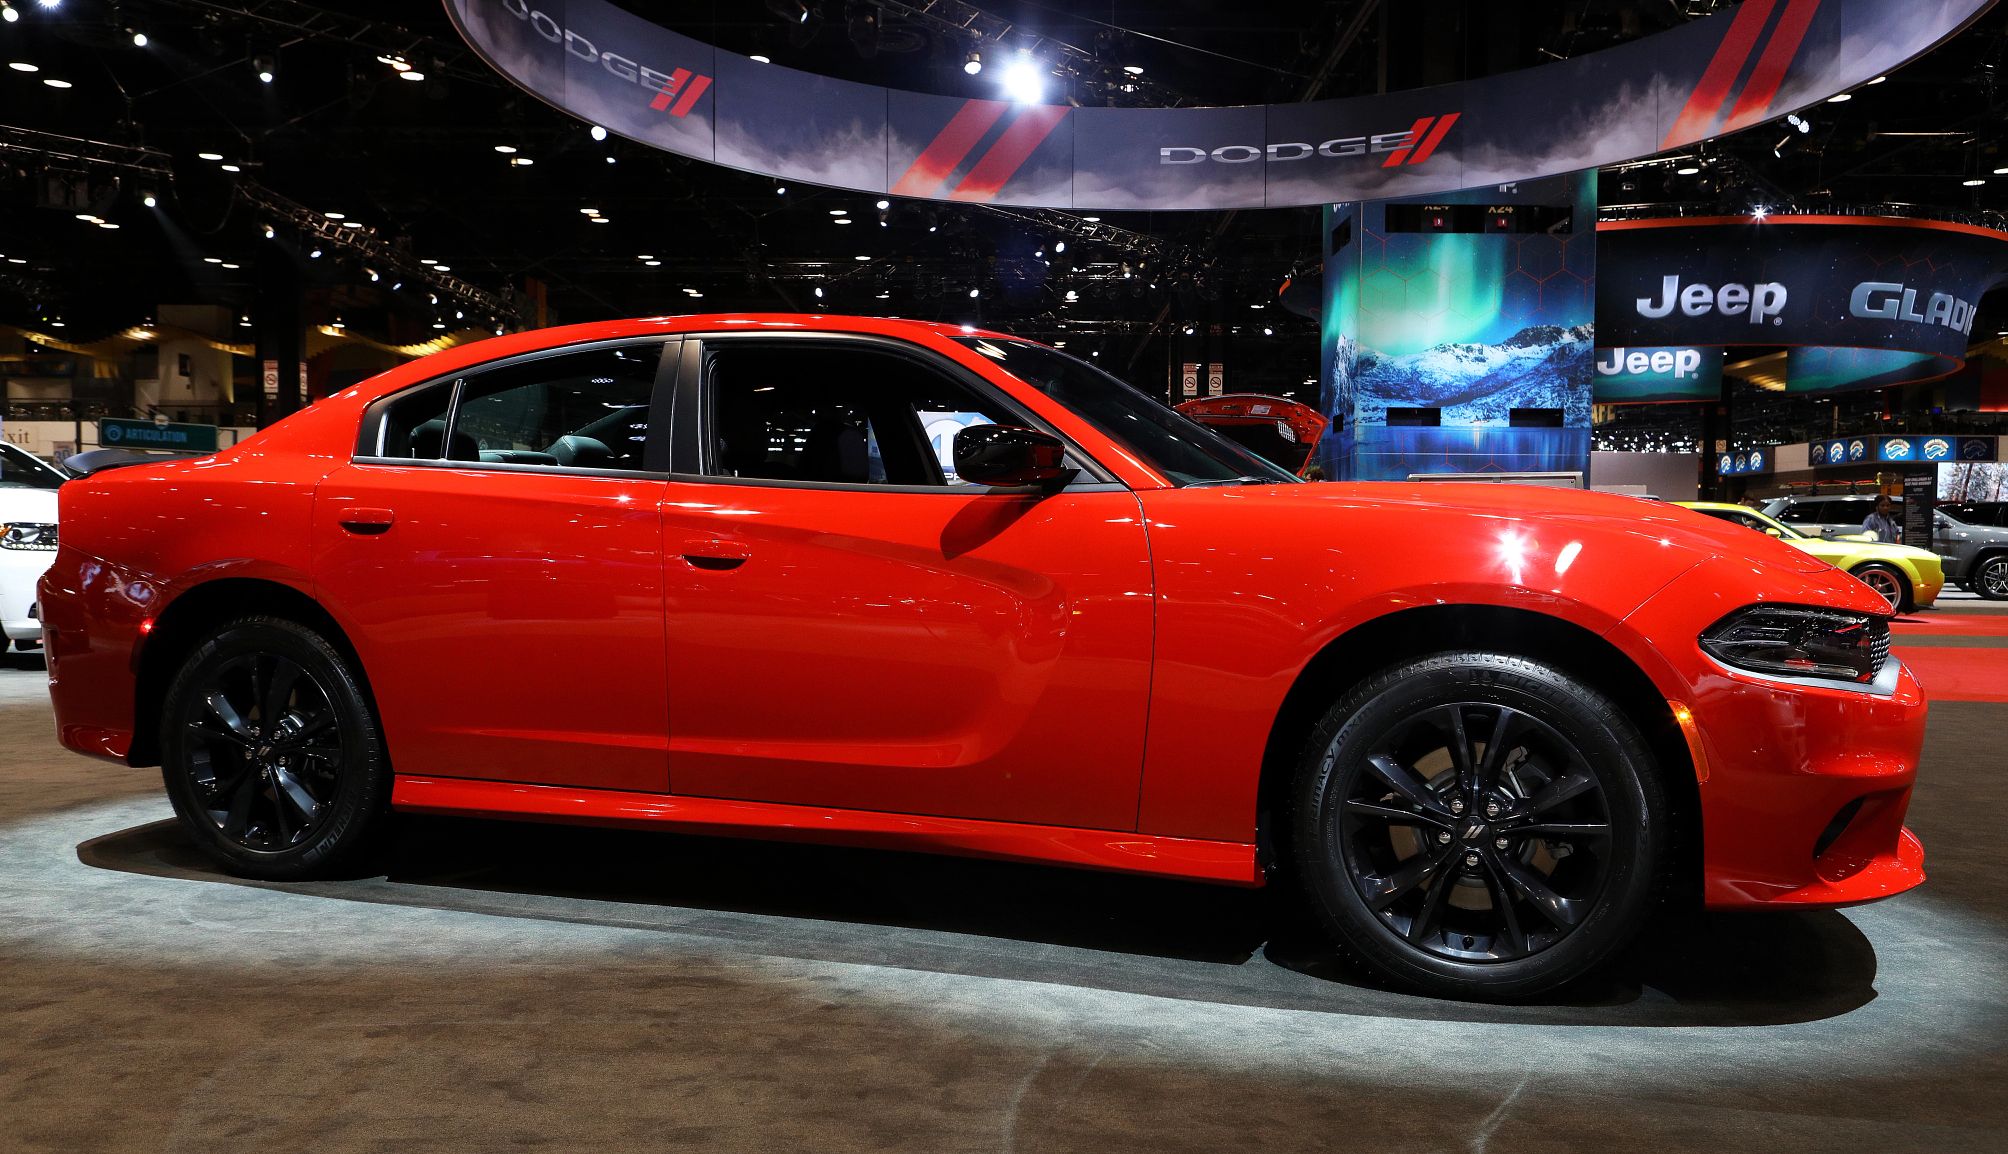 A Dodge Charger on display at a Chicago auto show